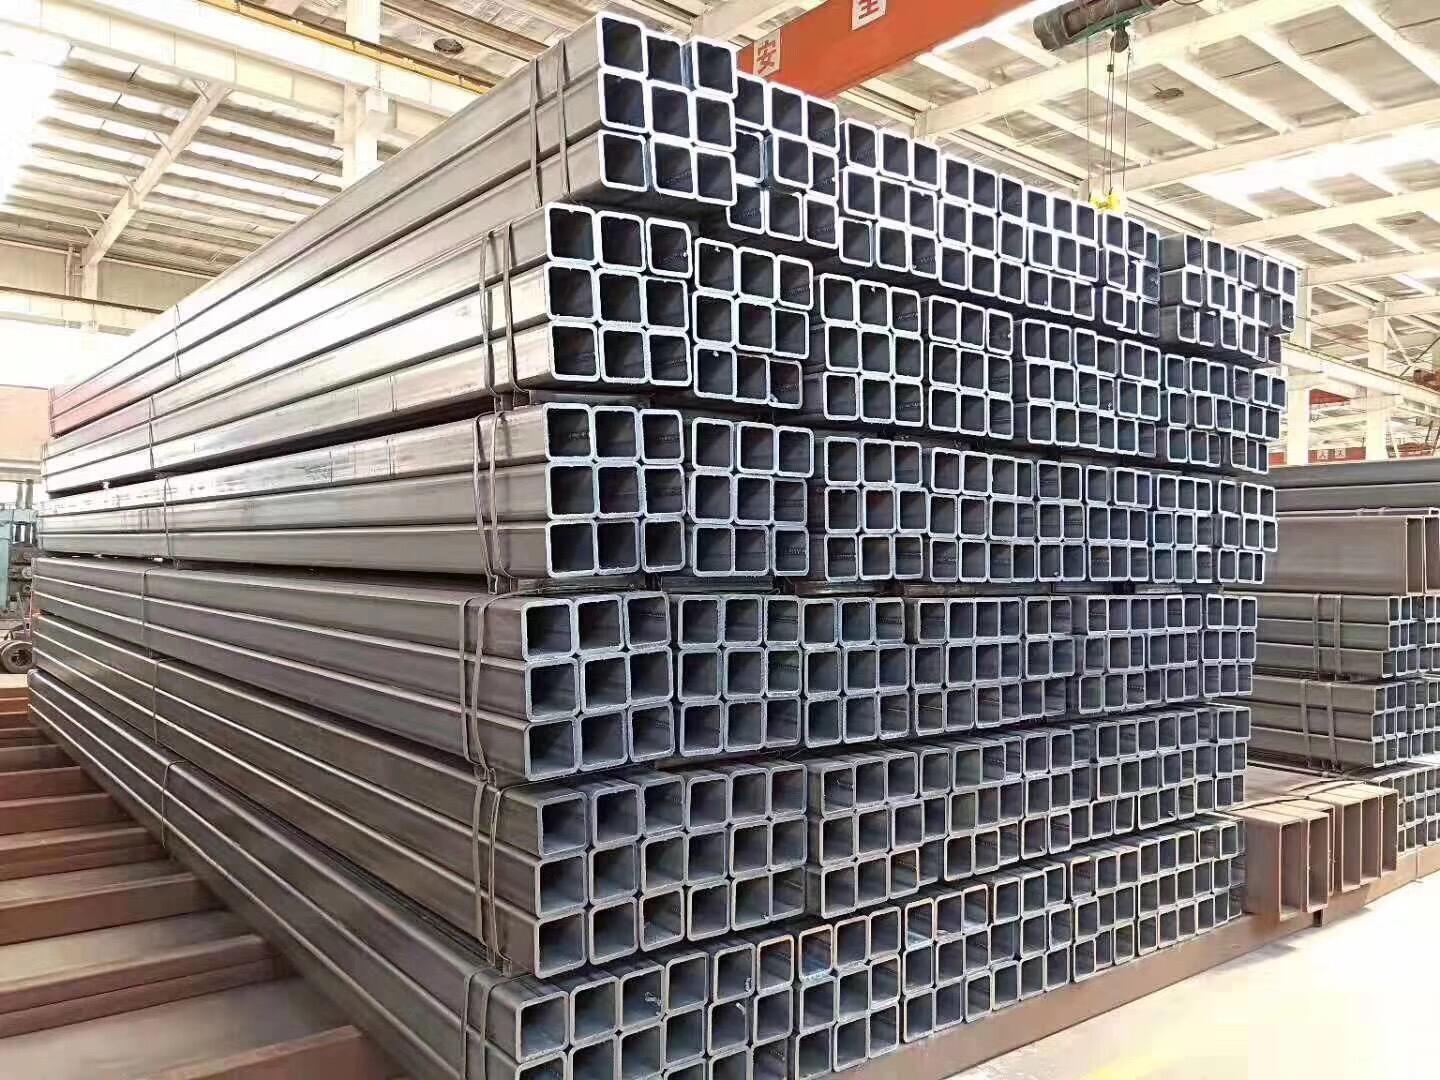 Steel products